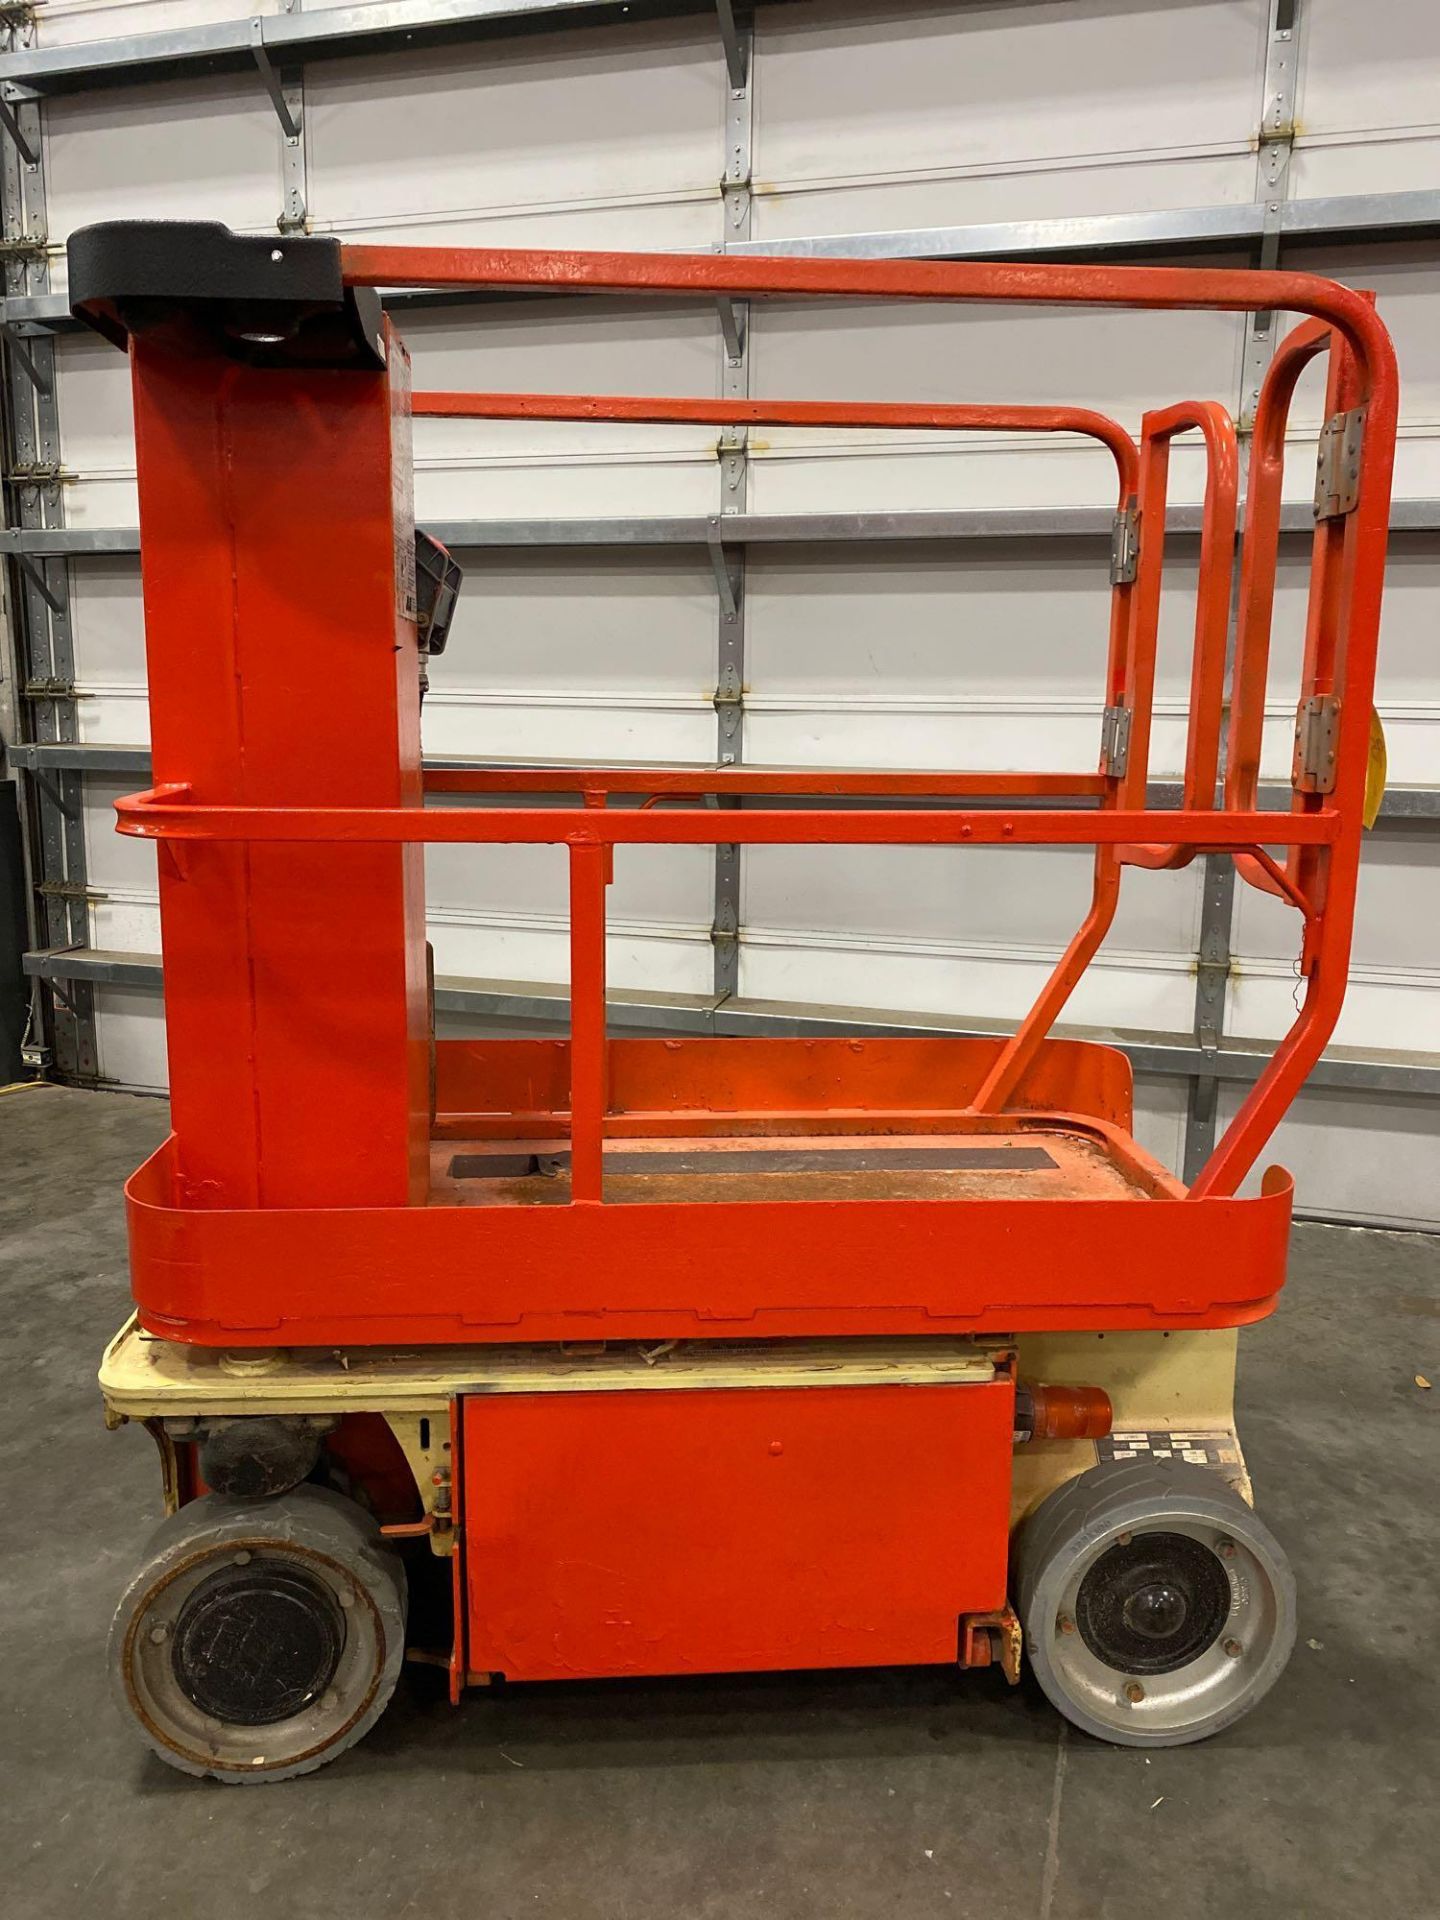 JLG 1230 ES ELECTRIC MAN LIFT, SELF PROPELLED, BUILT IN BATTERY CHARGER, 12' PLATFORM HEIGHT, APPROX - Image 2 of 3